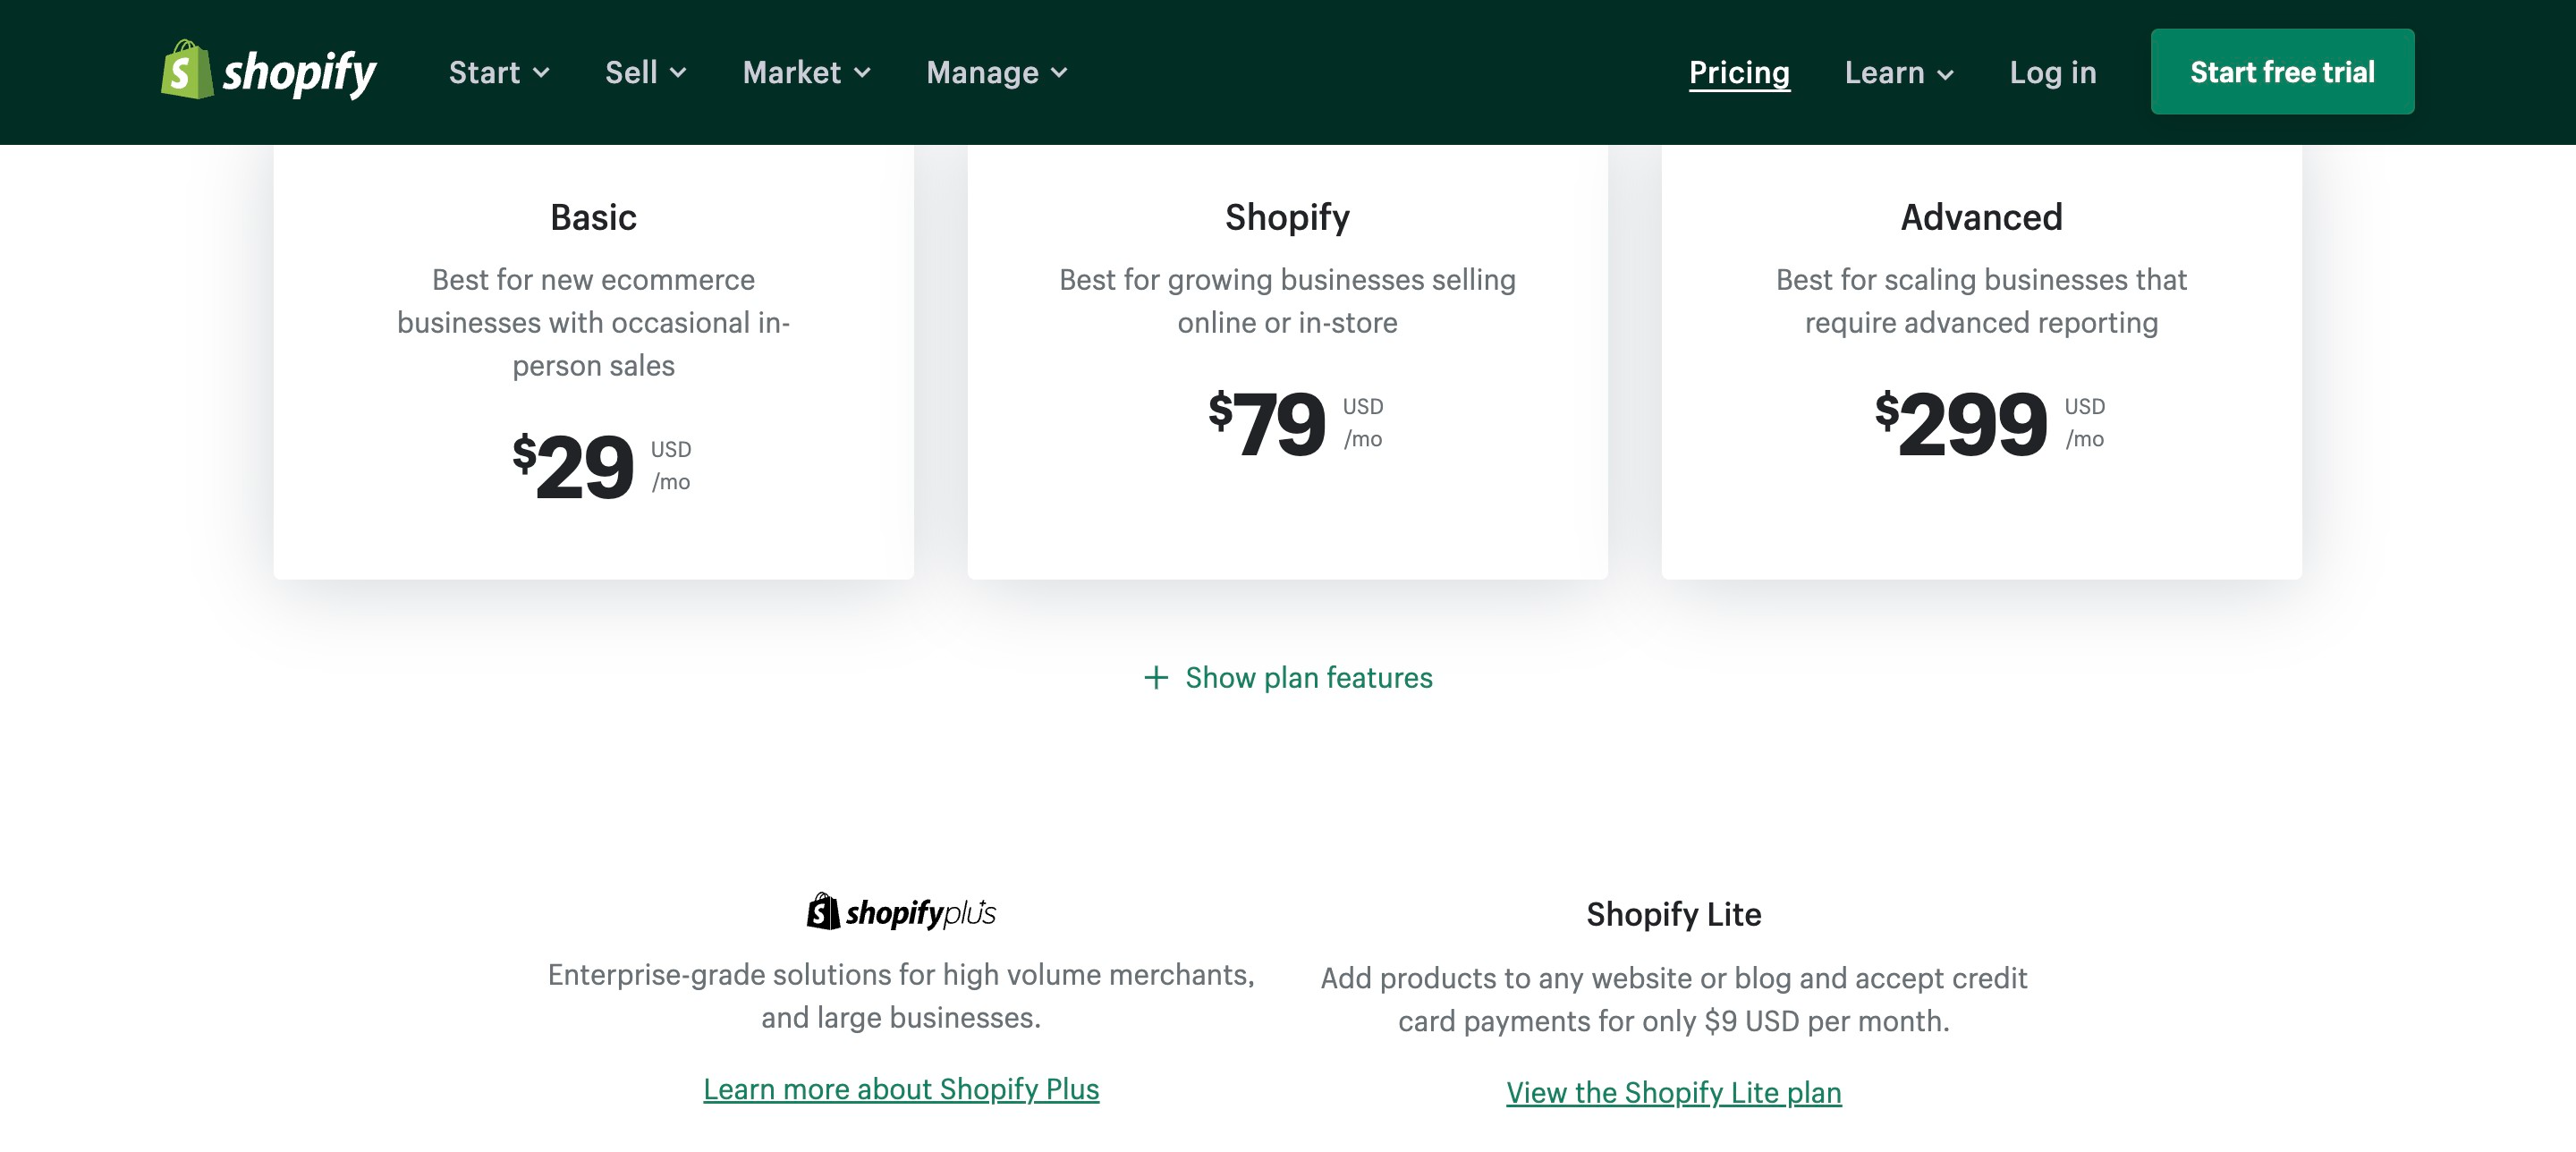 How do Shopify and Amazon differ in terms of pricing?